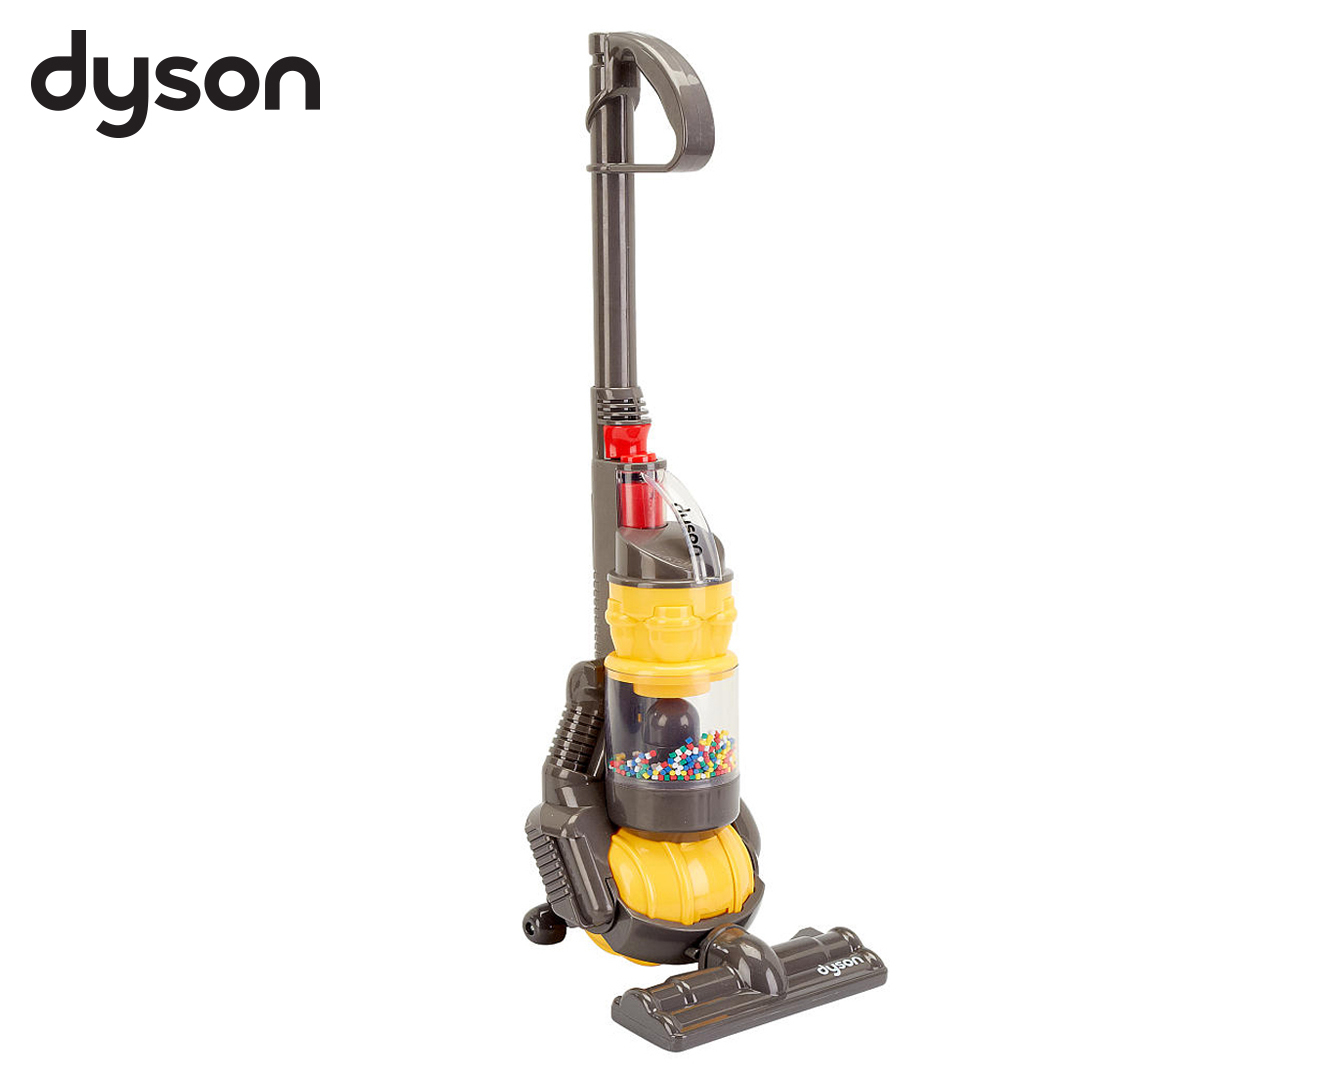 DYSON BALL VACUUM CLEANER NEW KIDS TOY CASDON DC24